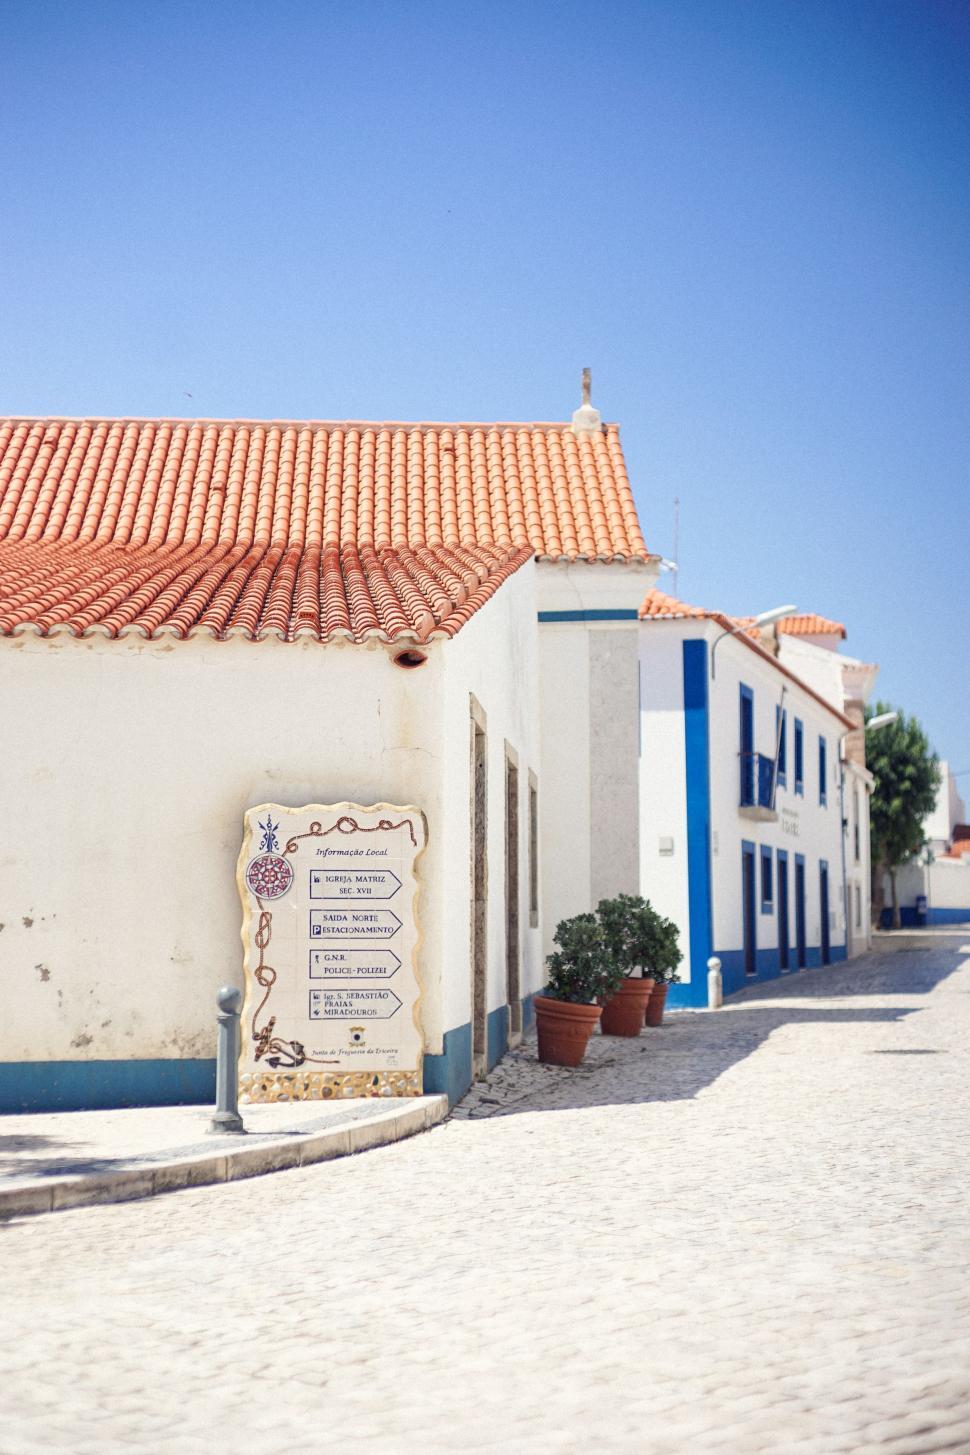 Free Image of White Building With Blue and Red Roof 